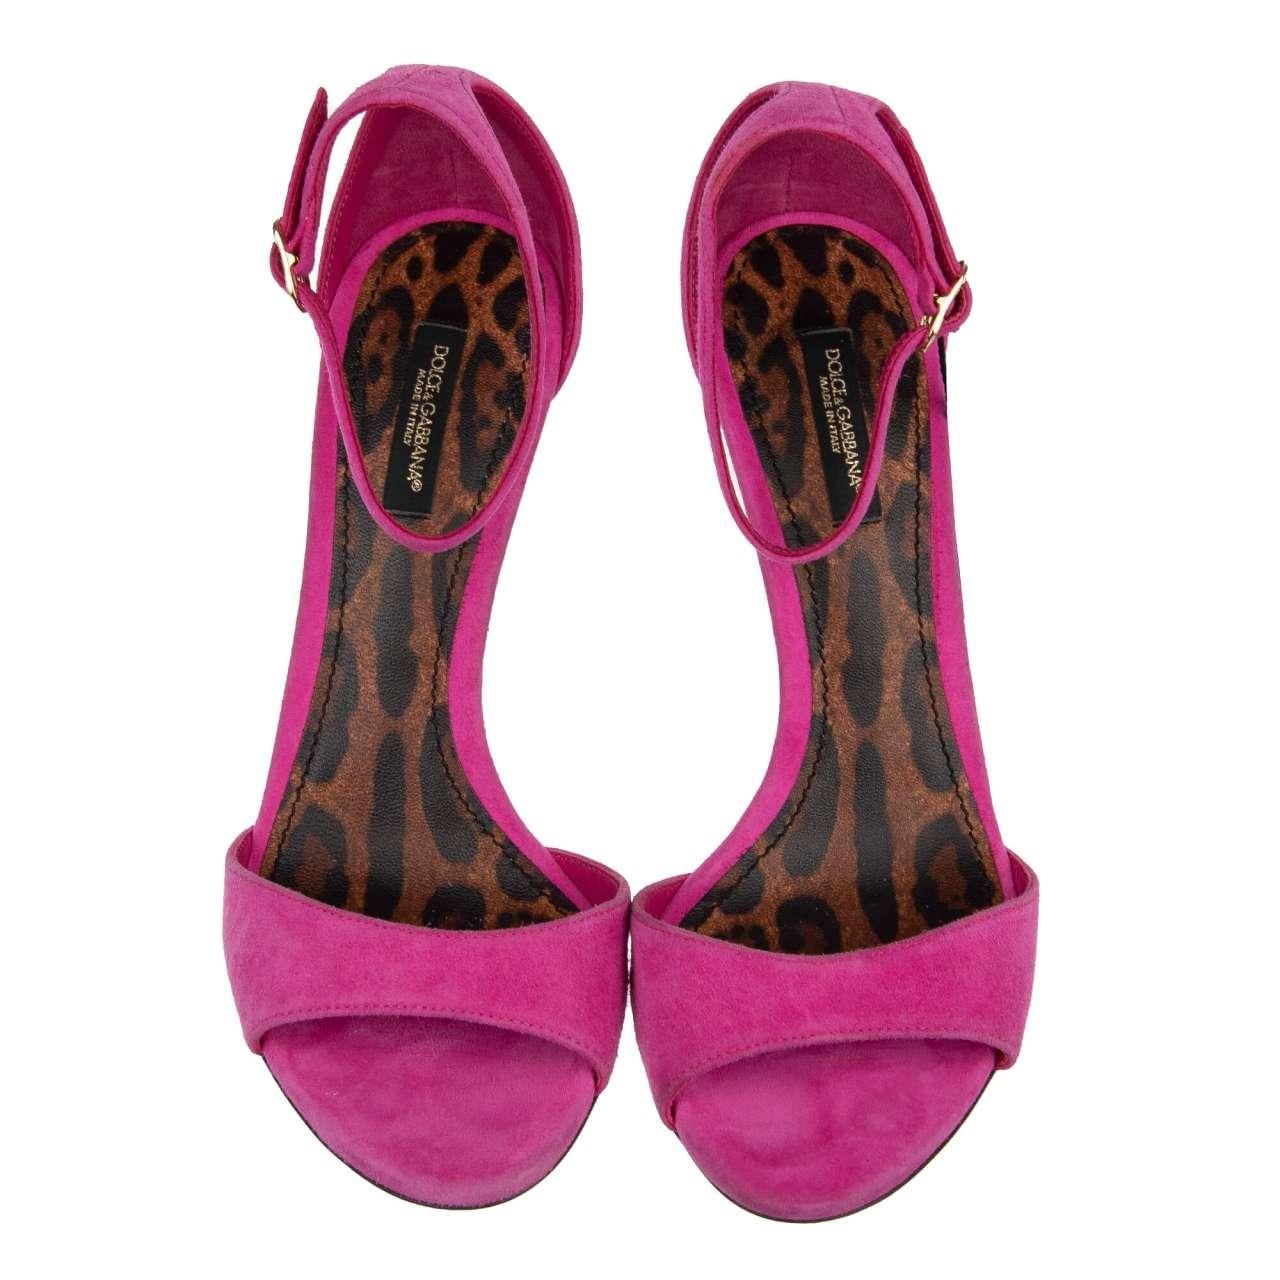 - Pointed suede leather Heels Sandals BELLUCCI with leopard sole and straps in pink by DOLCE & GABBANA - New with Box - MADE IN ITALY - Former RRP: EUR 845 - Leopard print sole - Model: CR0264-AC784-8H412 - Material: 100% Goat leather - Inner